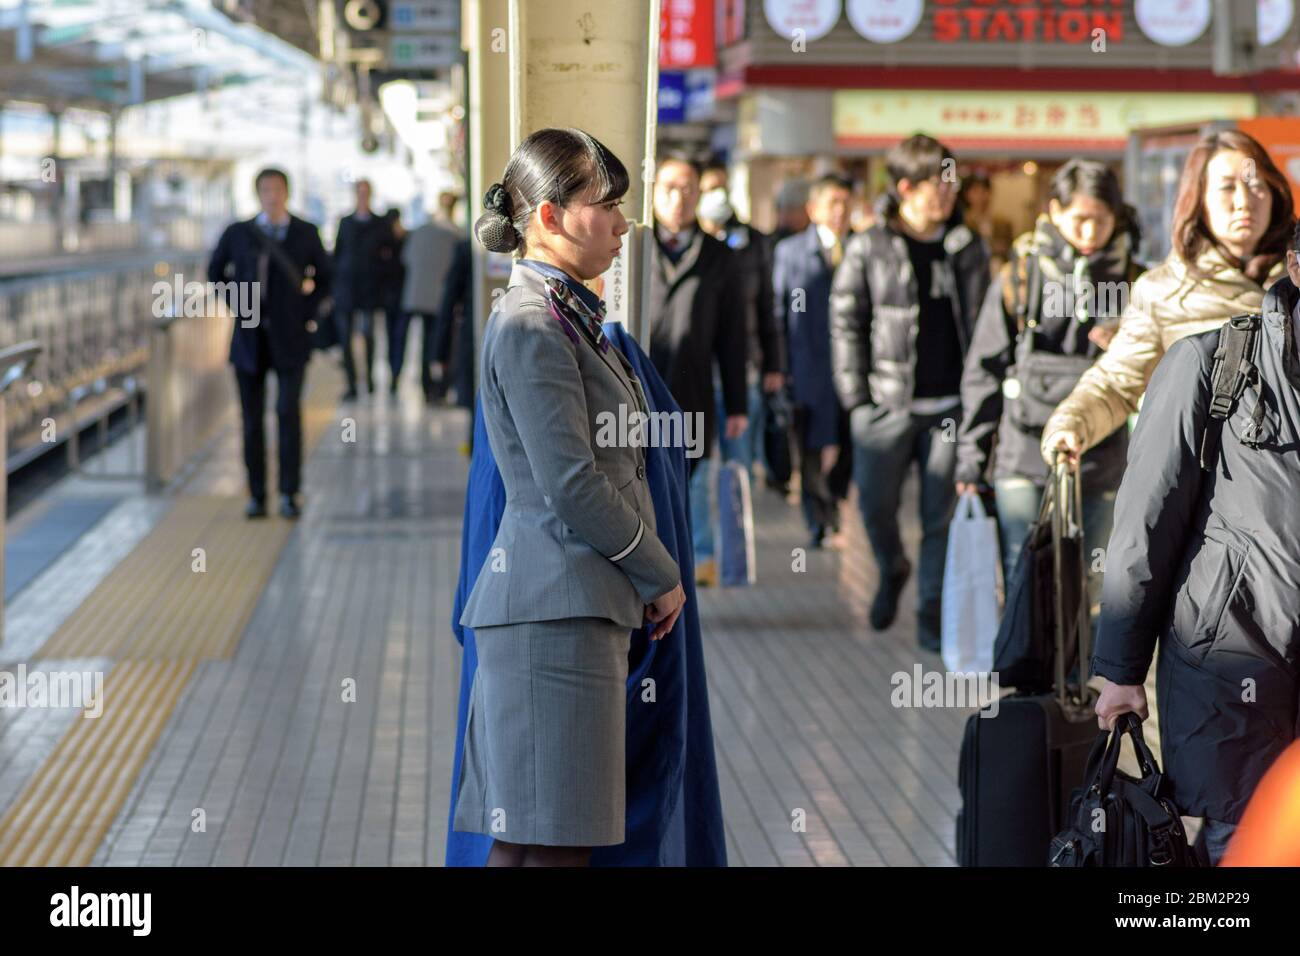 Osaka / Japan - December 20, 2017: Female train attendant standing at Shin-Osaka Railway Station, while passengers are waiting in line to board the sh Stock Photo